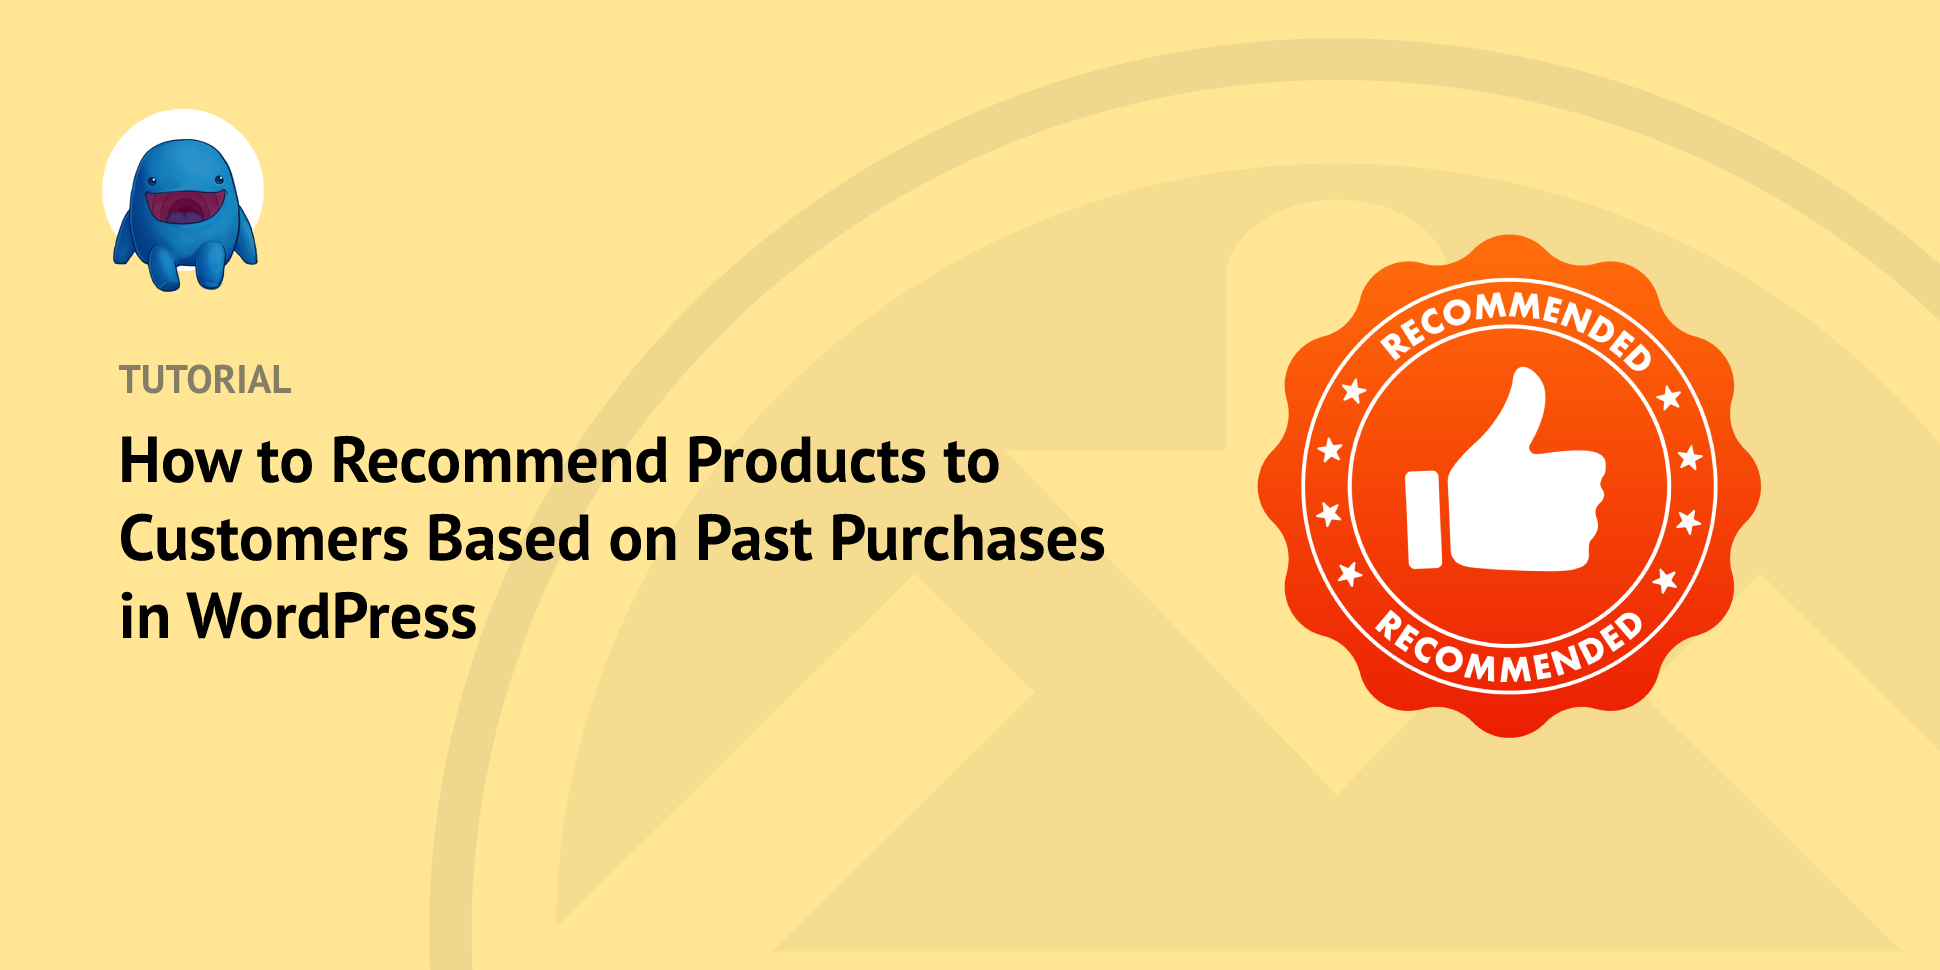 How to Recommend Products to Customers Based on Past Purchases in WordPress